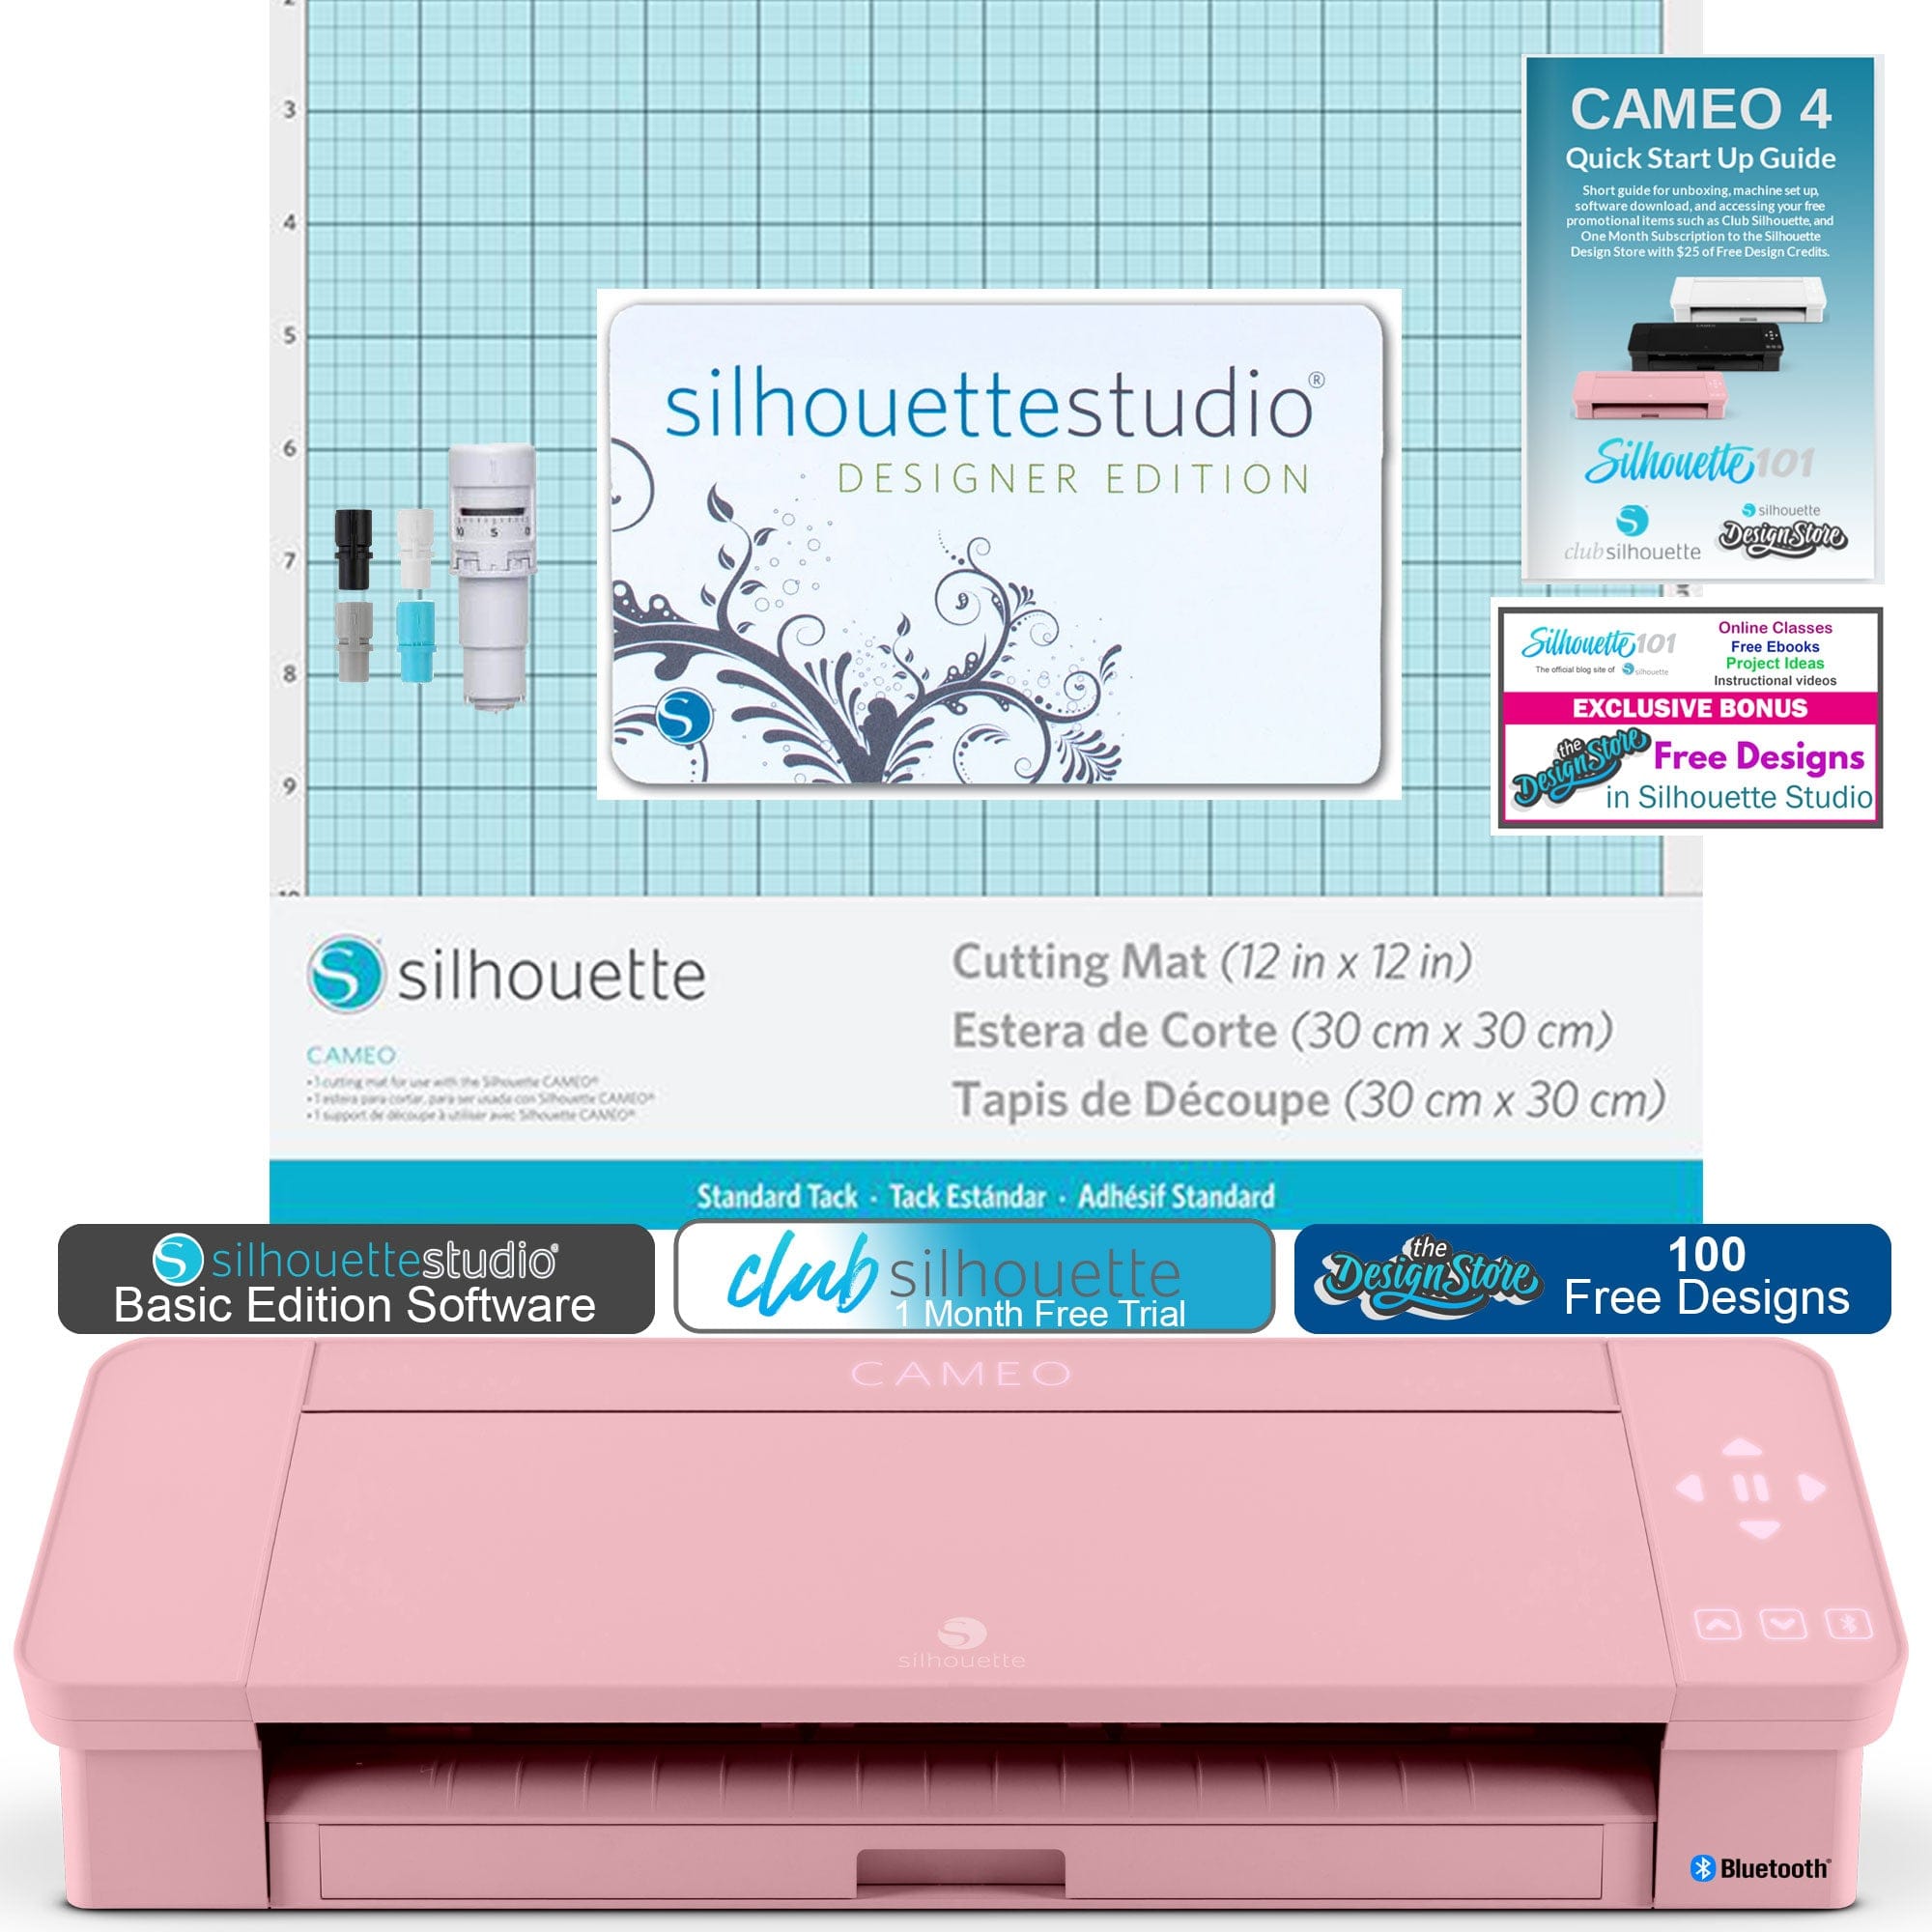 Silhouette America Silhouette Cameo 4 12" Vinyl Cutting Pink Edition Bundle with Silhouette Studio Designer Edition Software